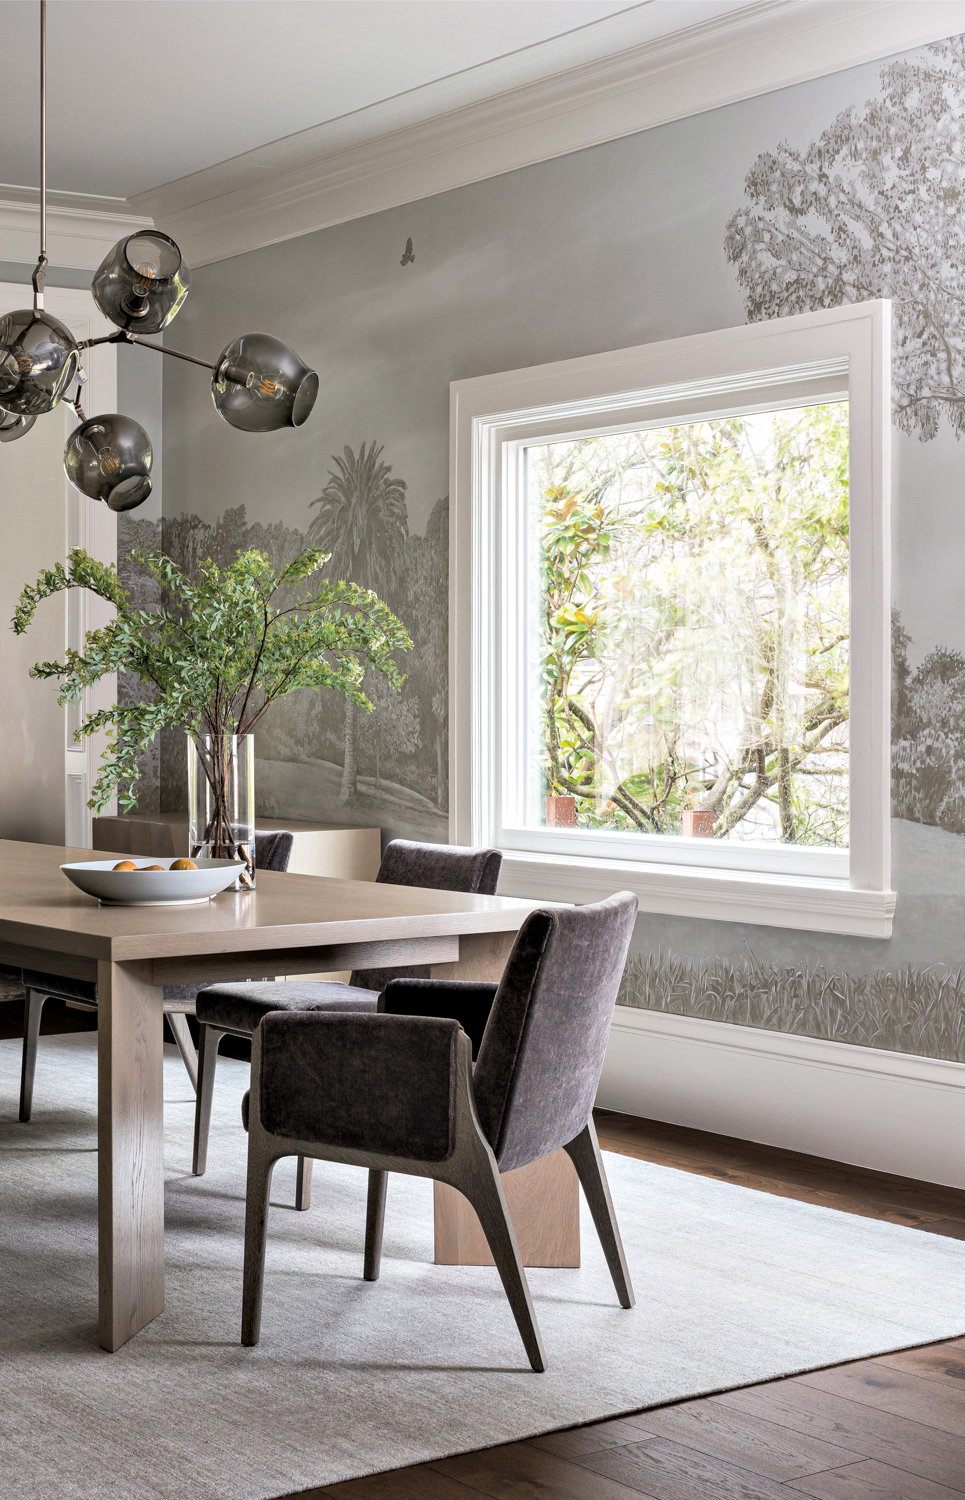 Dining room with landscape mural by Charles Leonard on the walls, wood table and dark, upholstered chairs